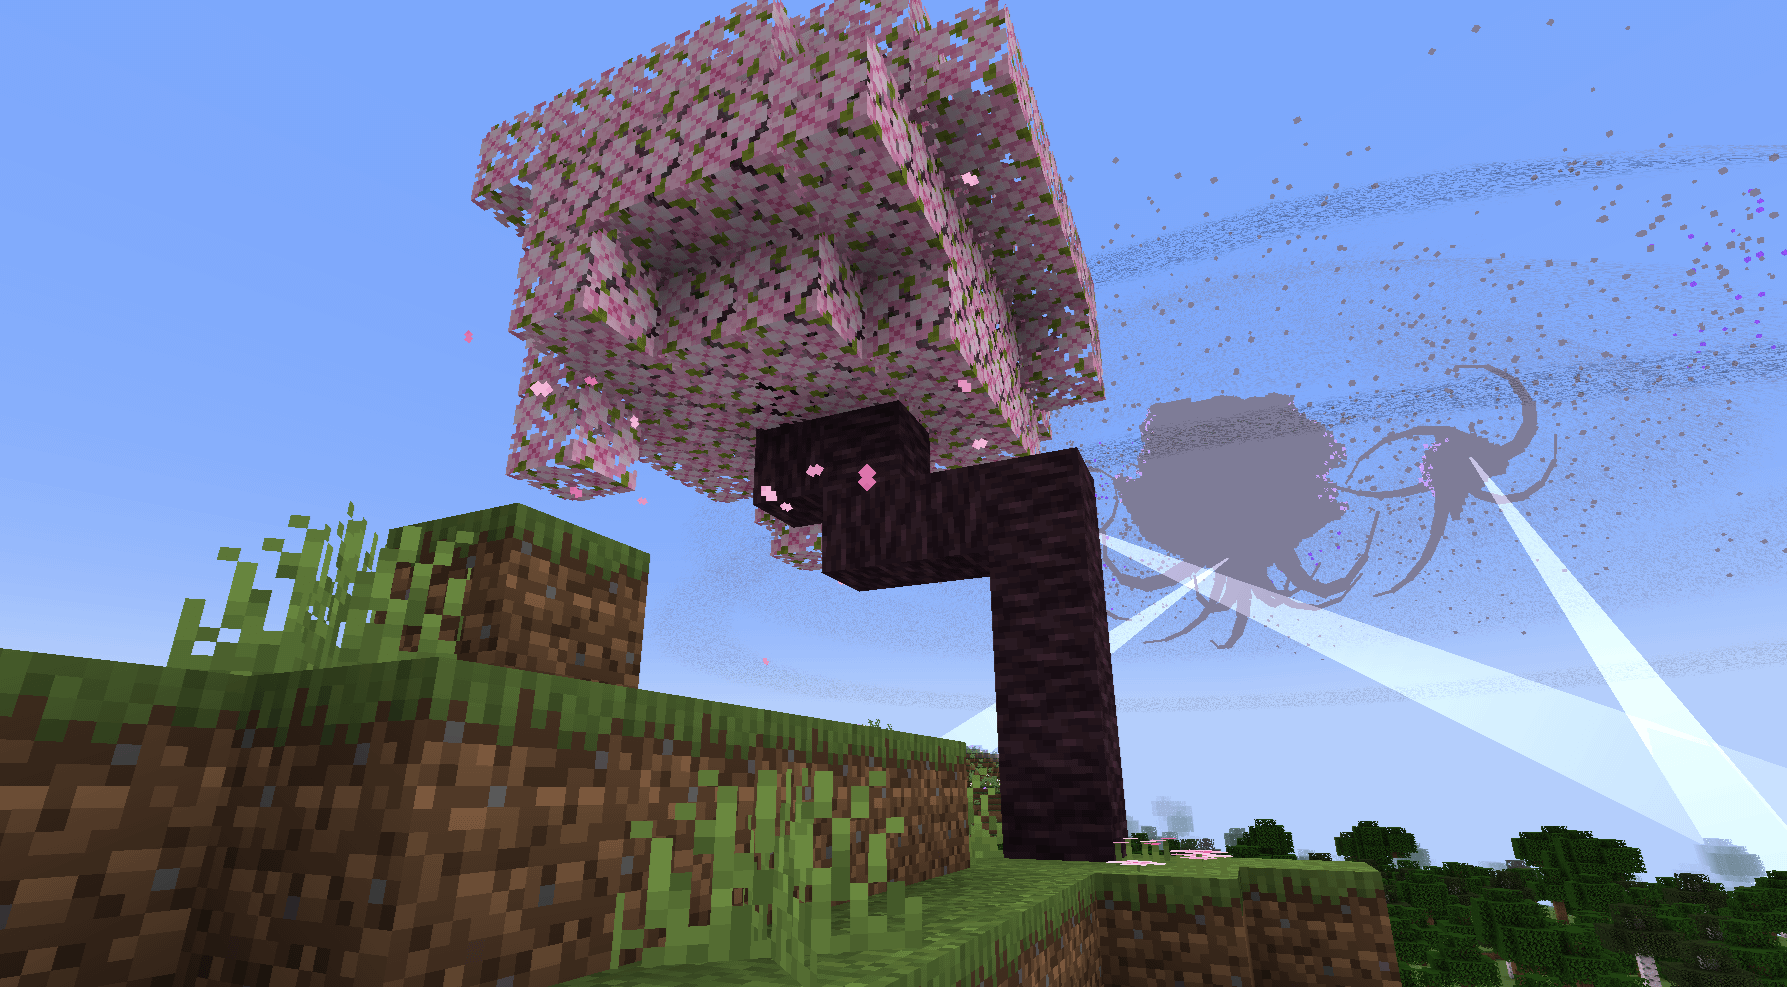 Minecraft Memes - "Tiny cherry blossom biome in 1.20.1 with a twist 😏"